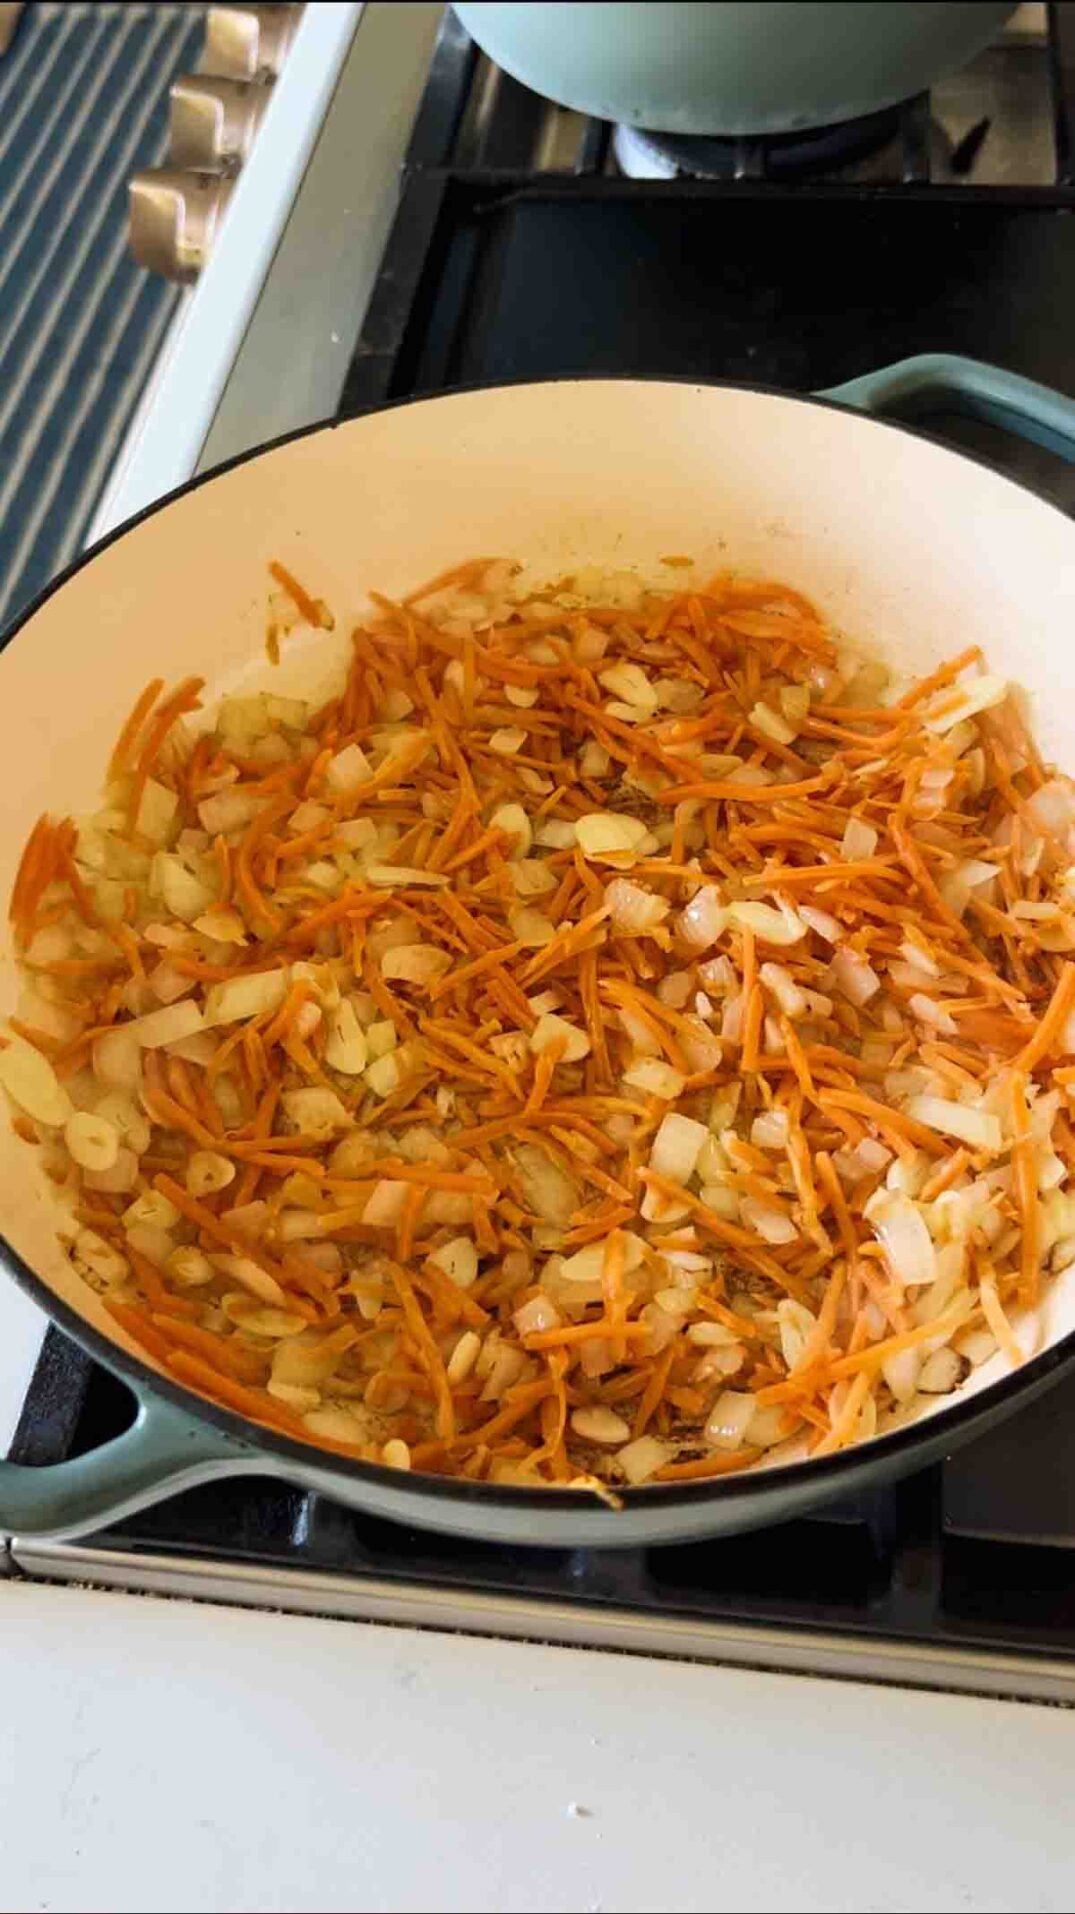 cooked shredded carrots in a blue braising dish on the stovetop.